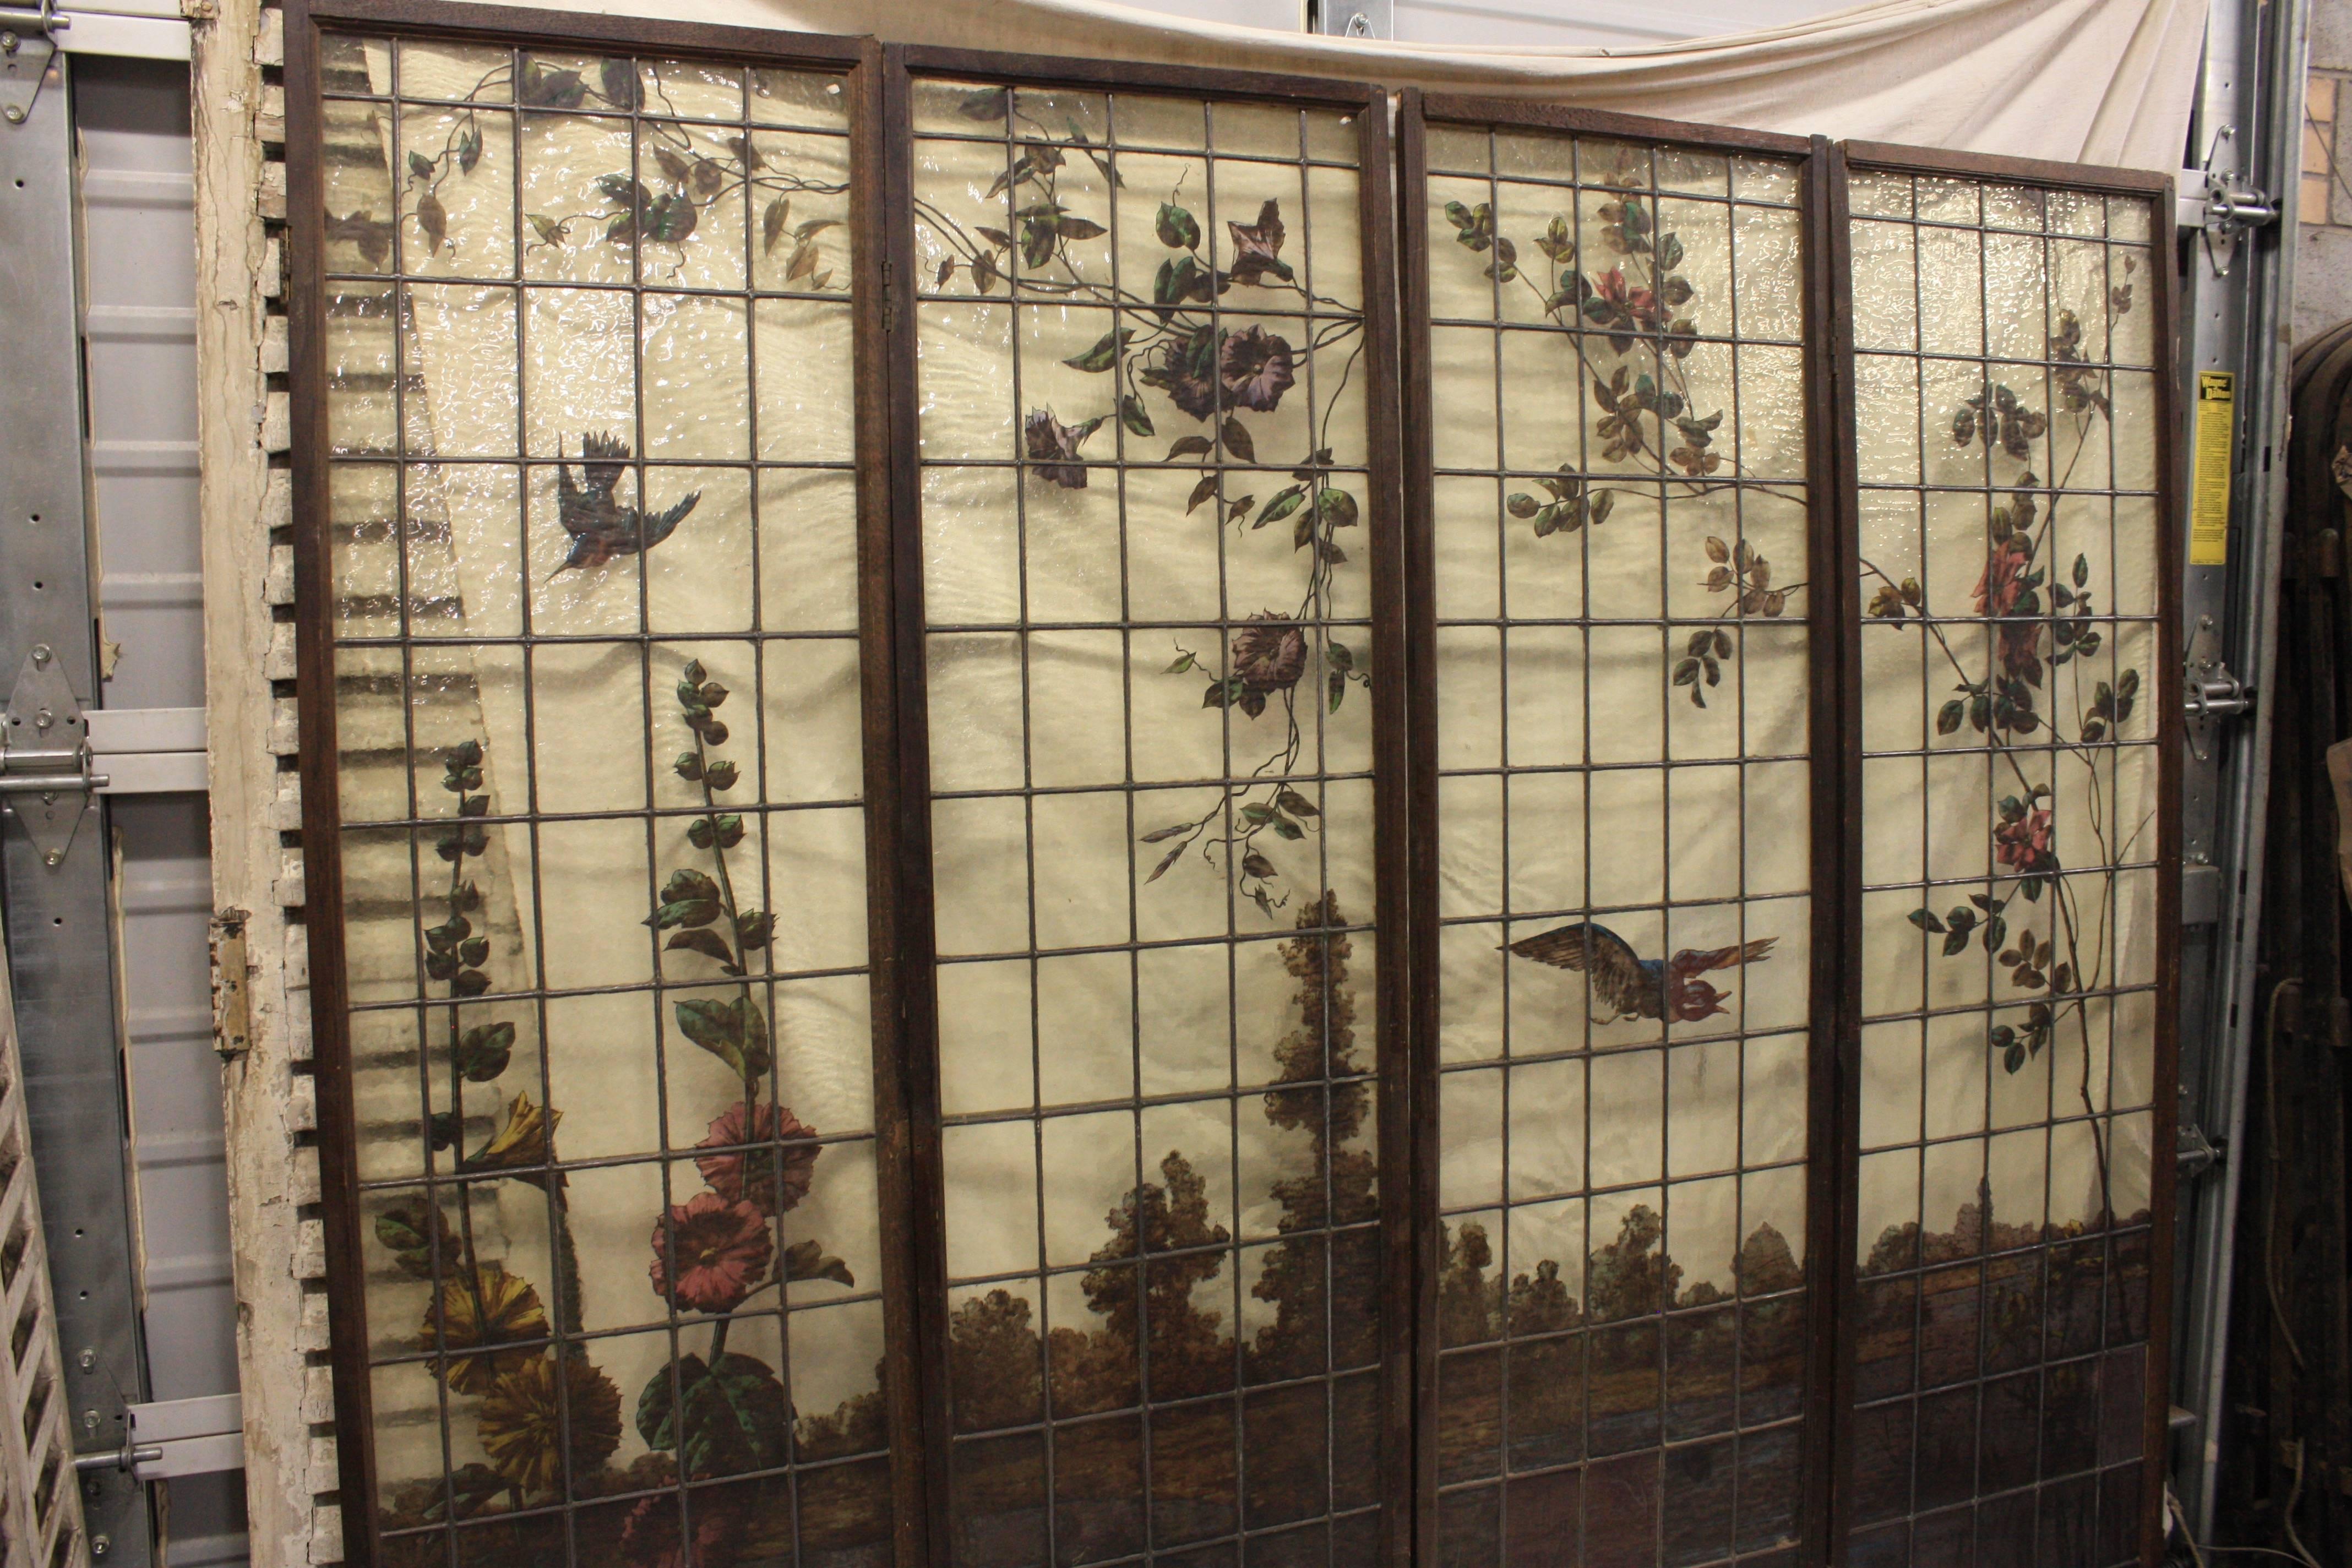 Beautiful 19th century French screen made of hand-painted stained glass window.